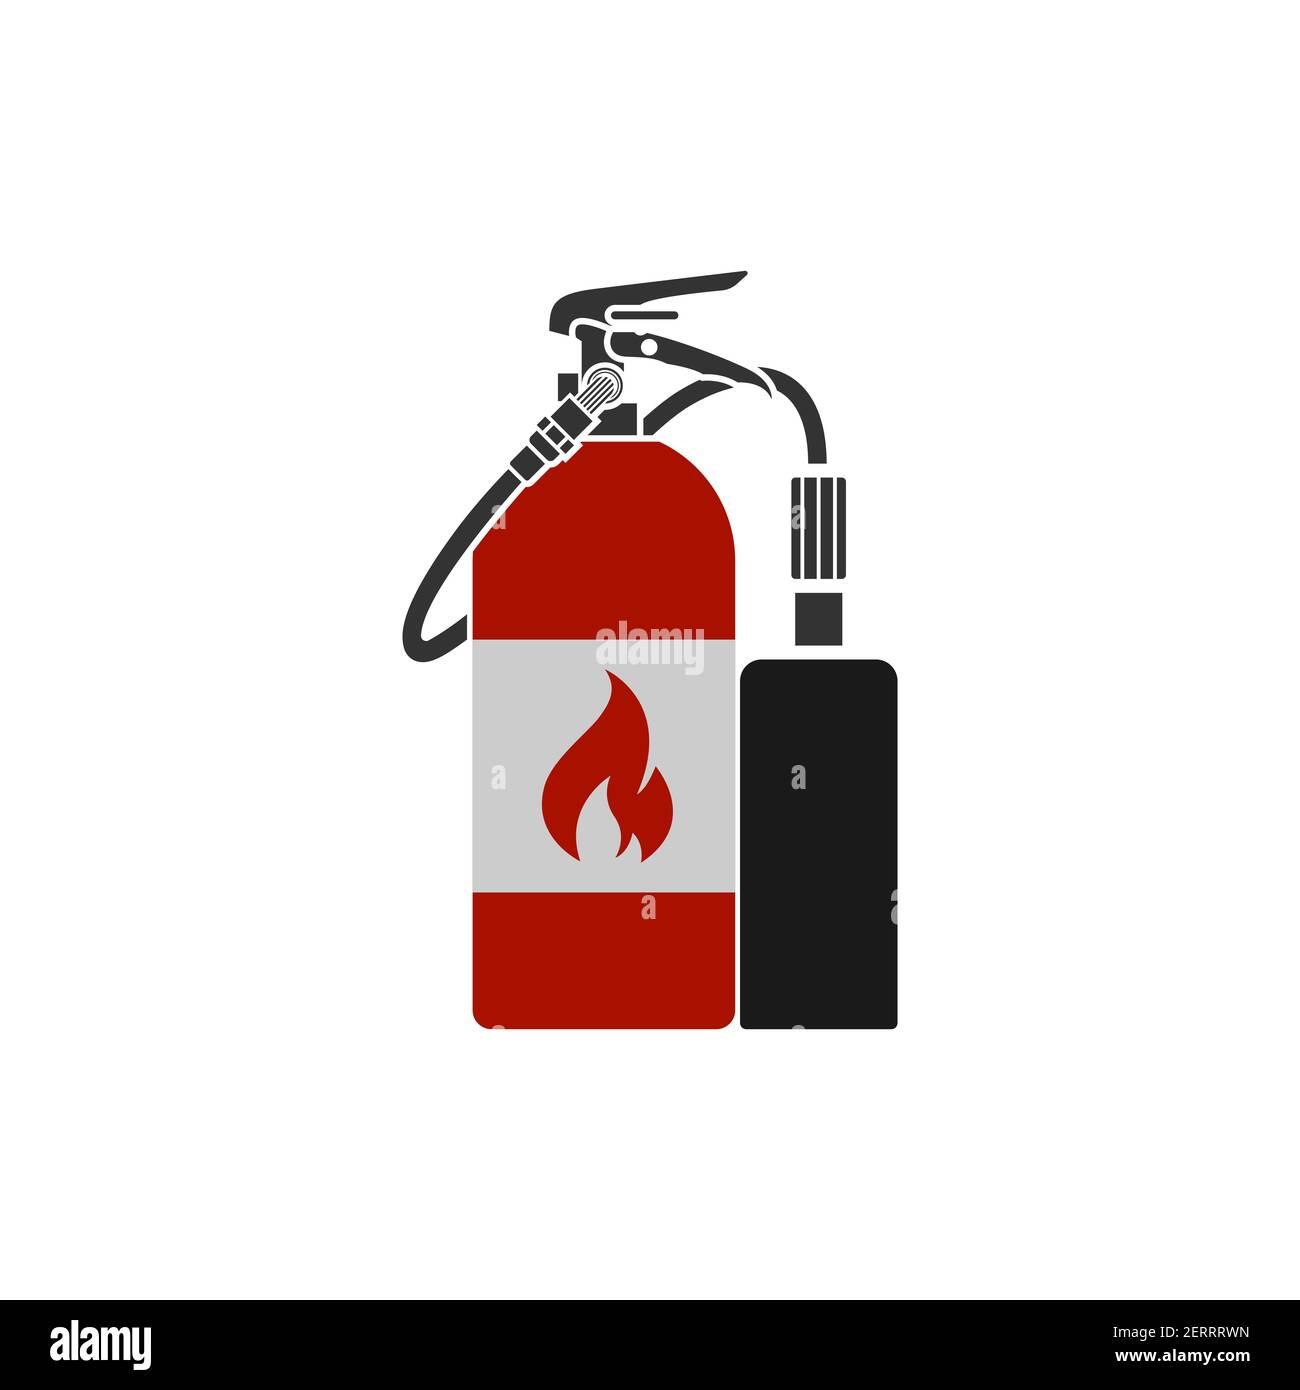 Realistic vector fire extinguisher icon. Portable device for extinguishing fires by releasing stored extinguishing agent. Stock Vector